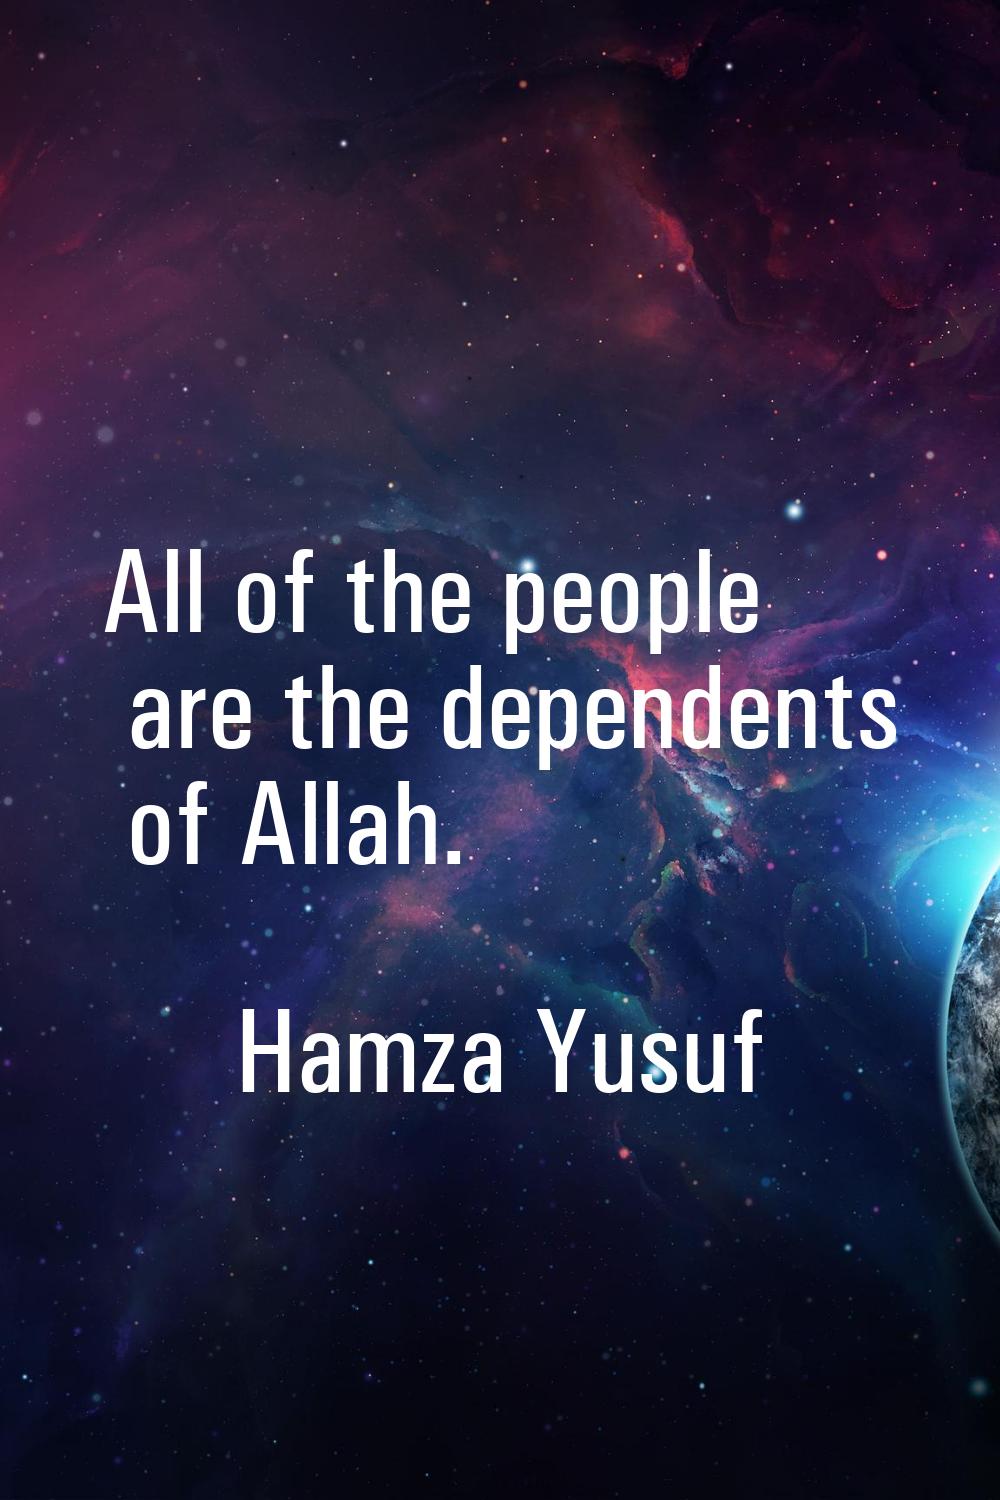 All of the people are the dependents of Allah.